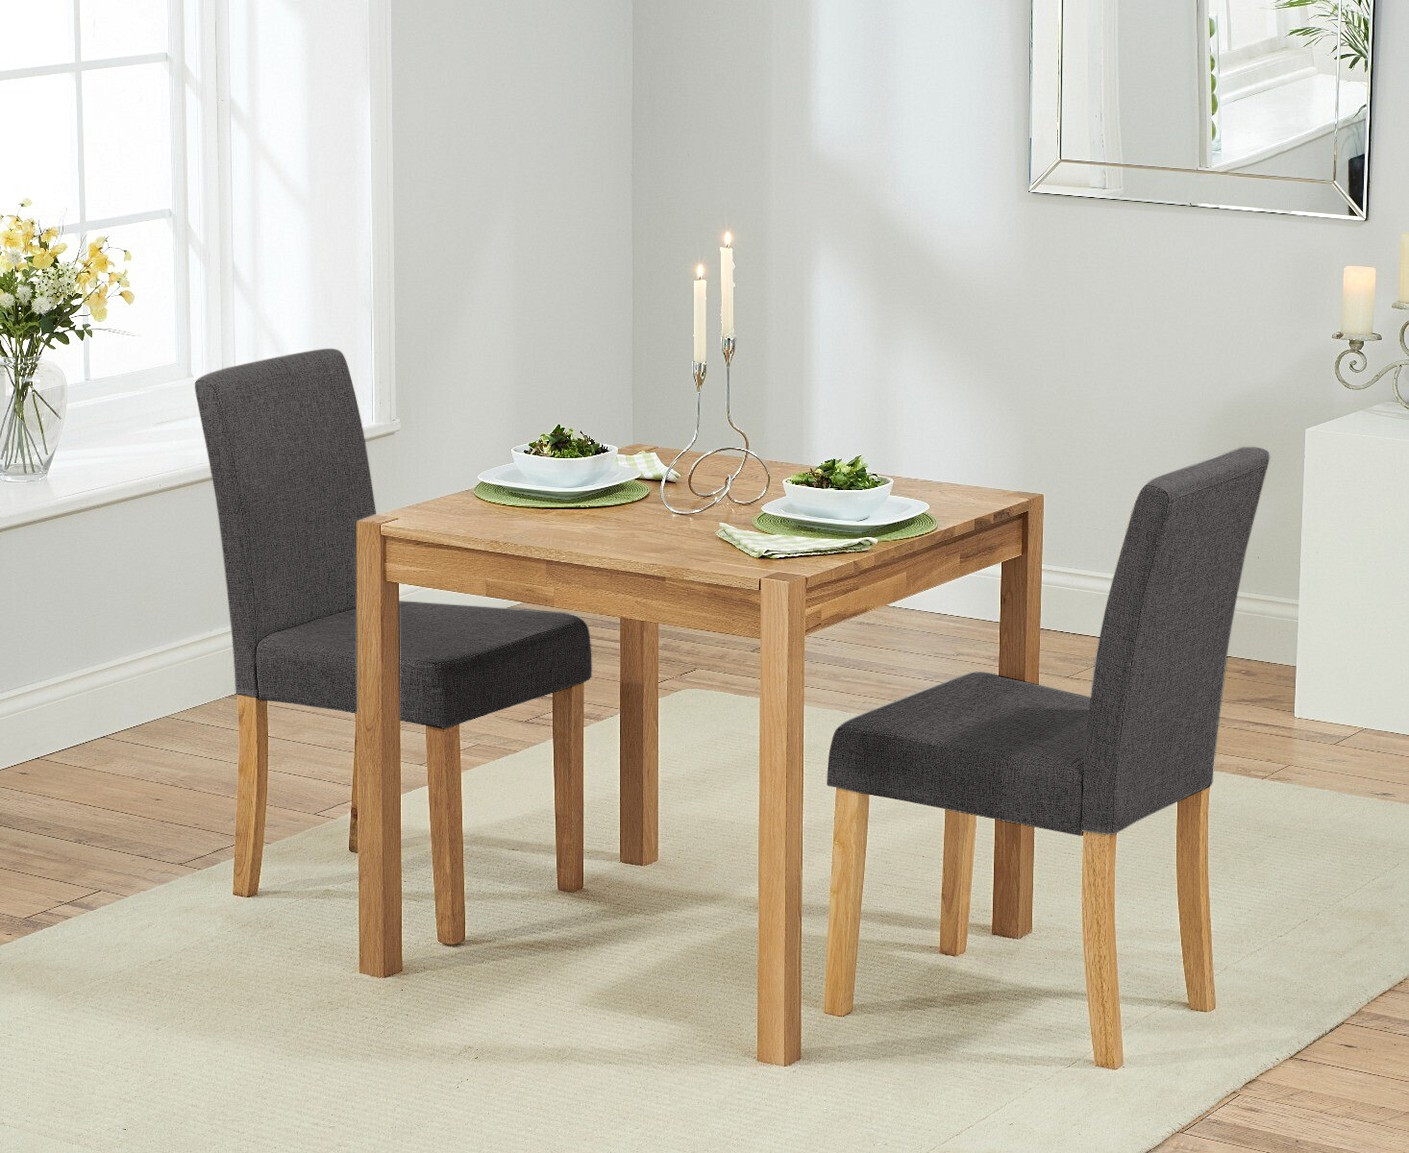 Photo 2 of York 80cm solid oak dining table with 2 charcoal lila chairs